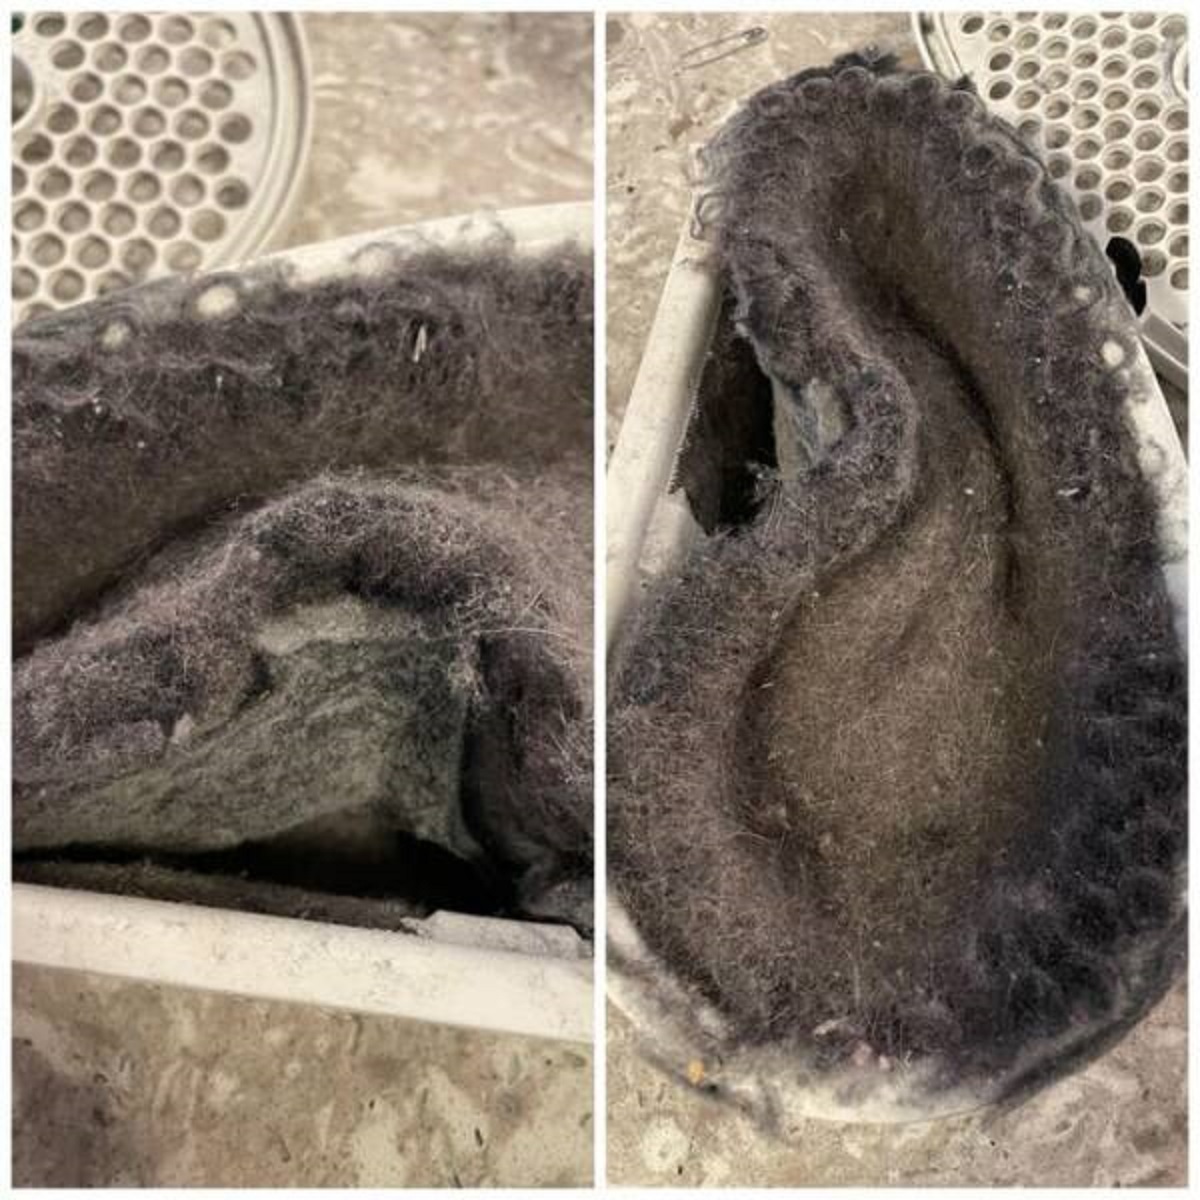 "The lint trap in my friend’s Airbnb"